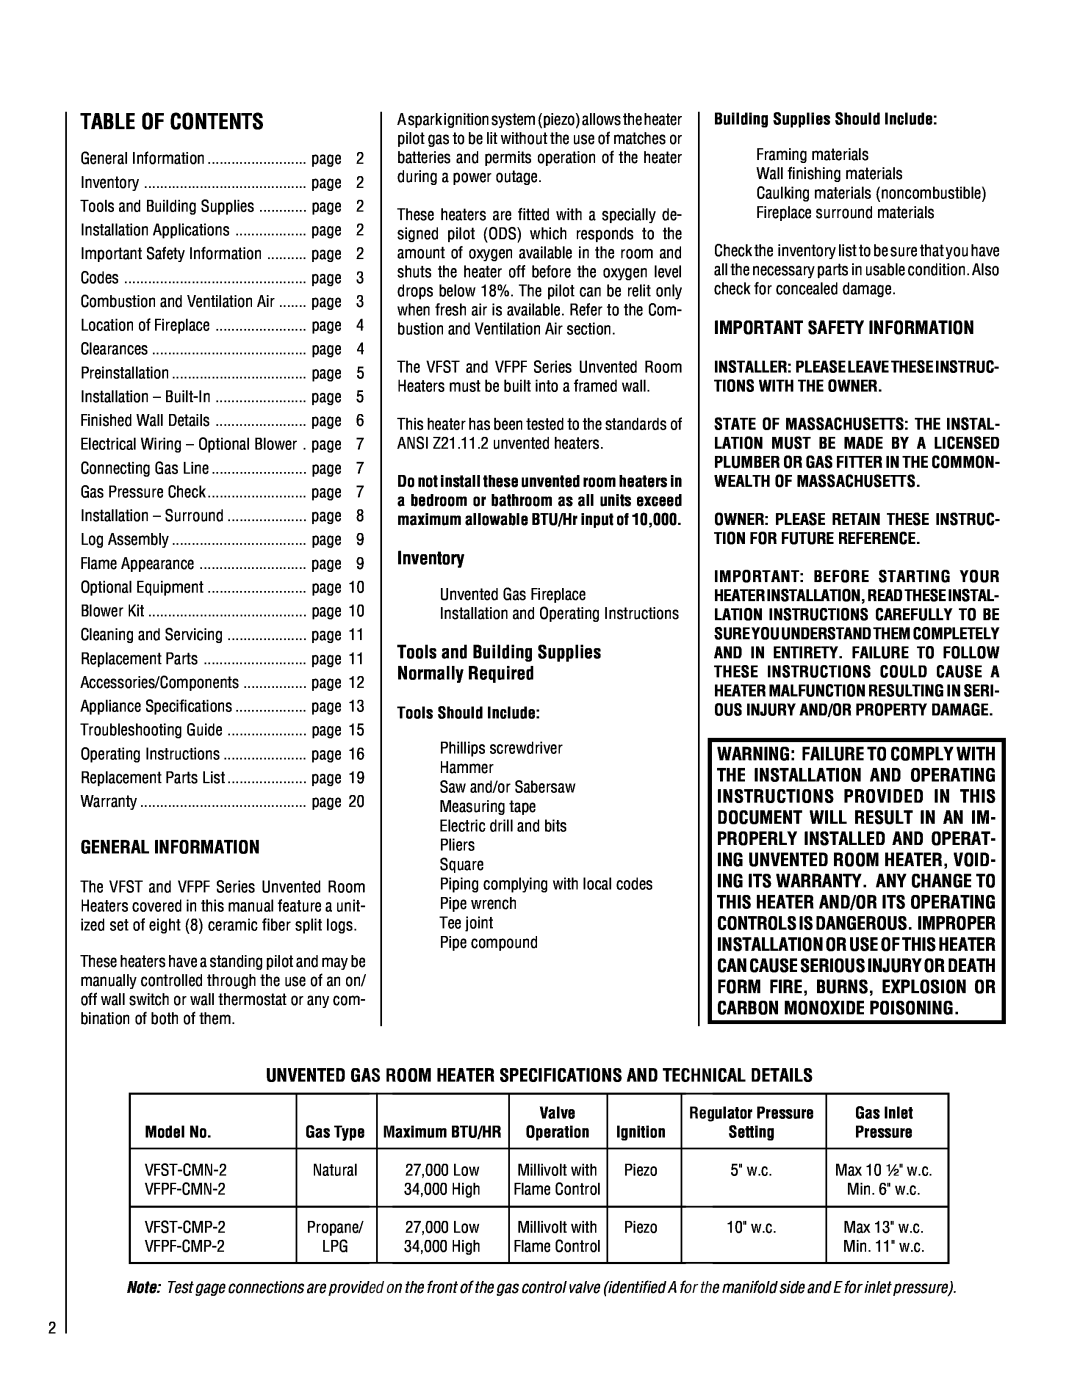 Superior VFST-CMN-2 Table Of Contents, General Information, Inventory, Tools and Building Supplies Normally Required 